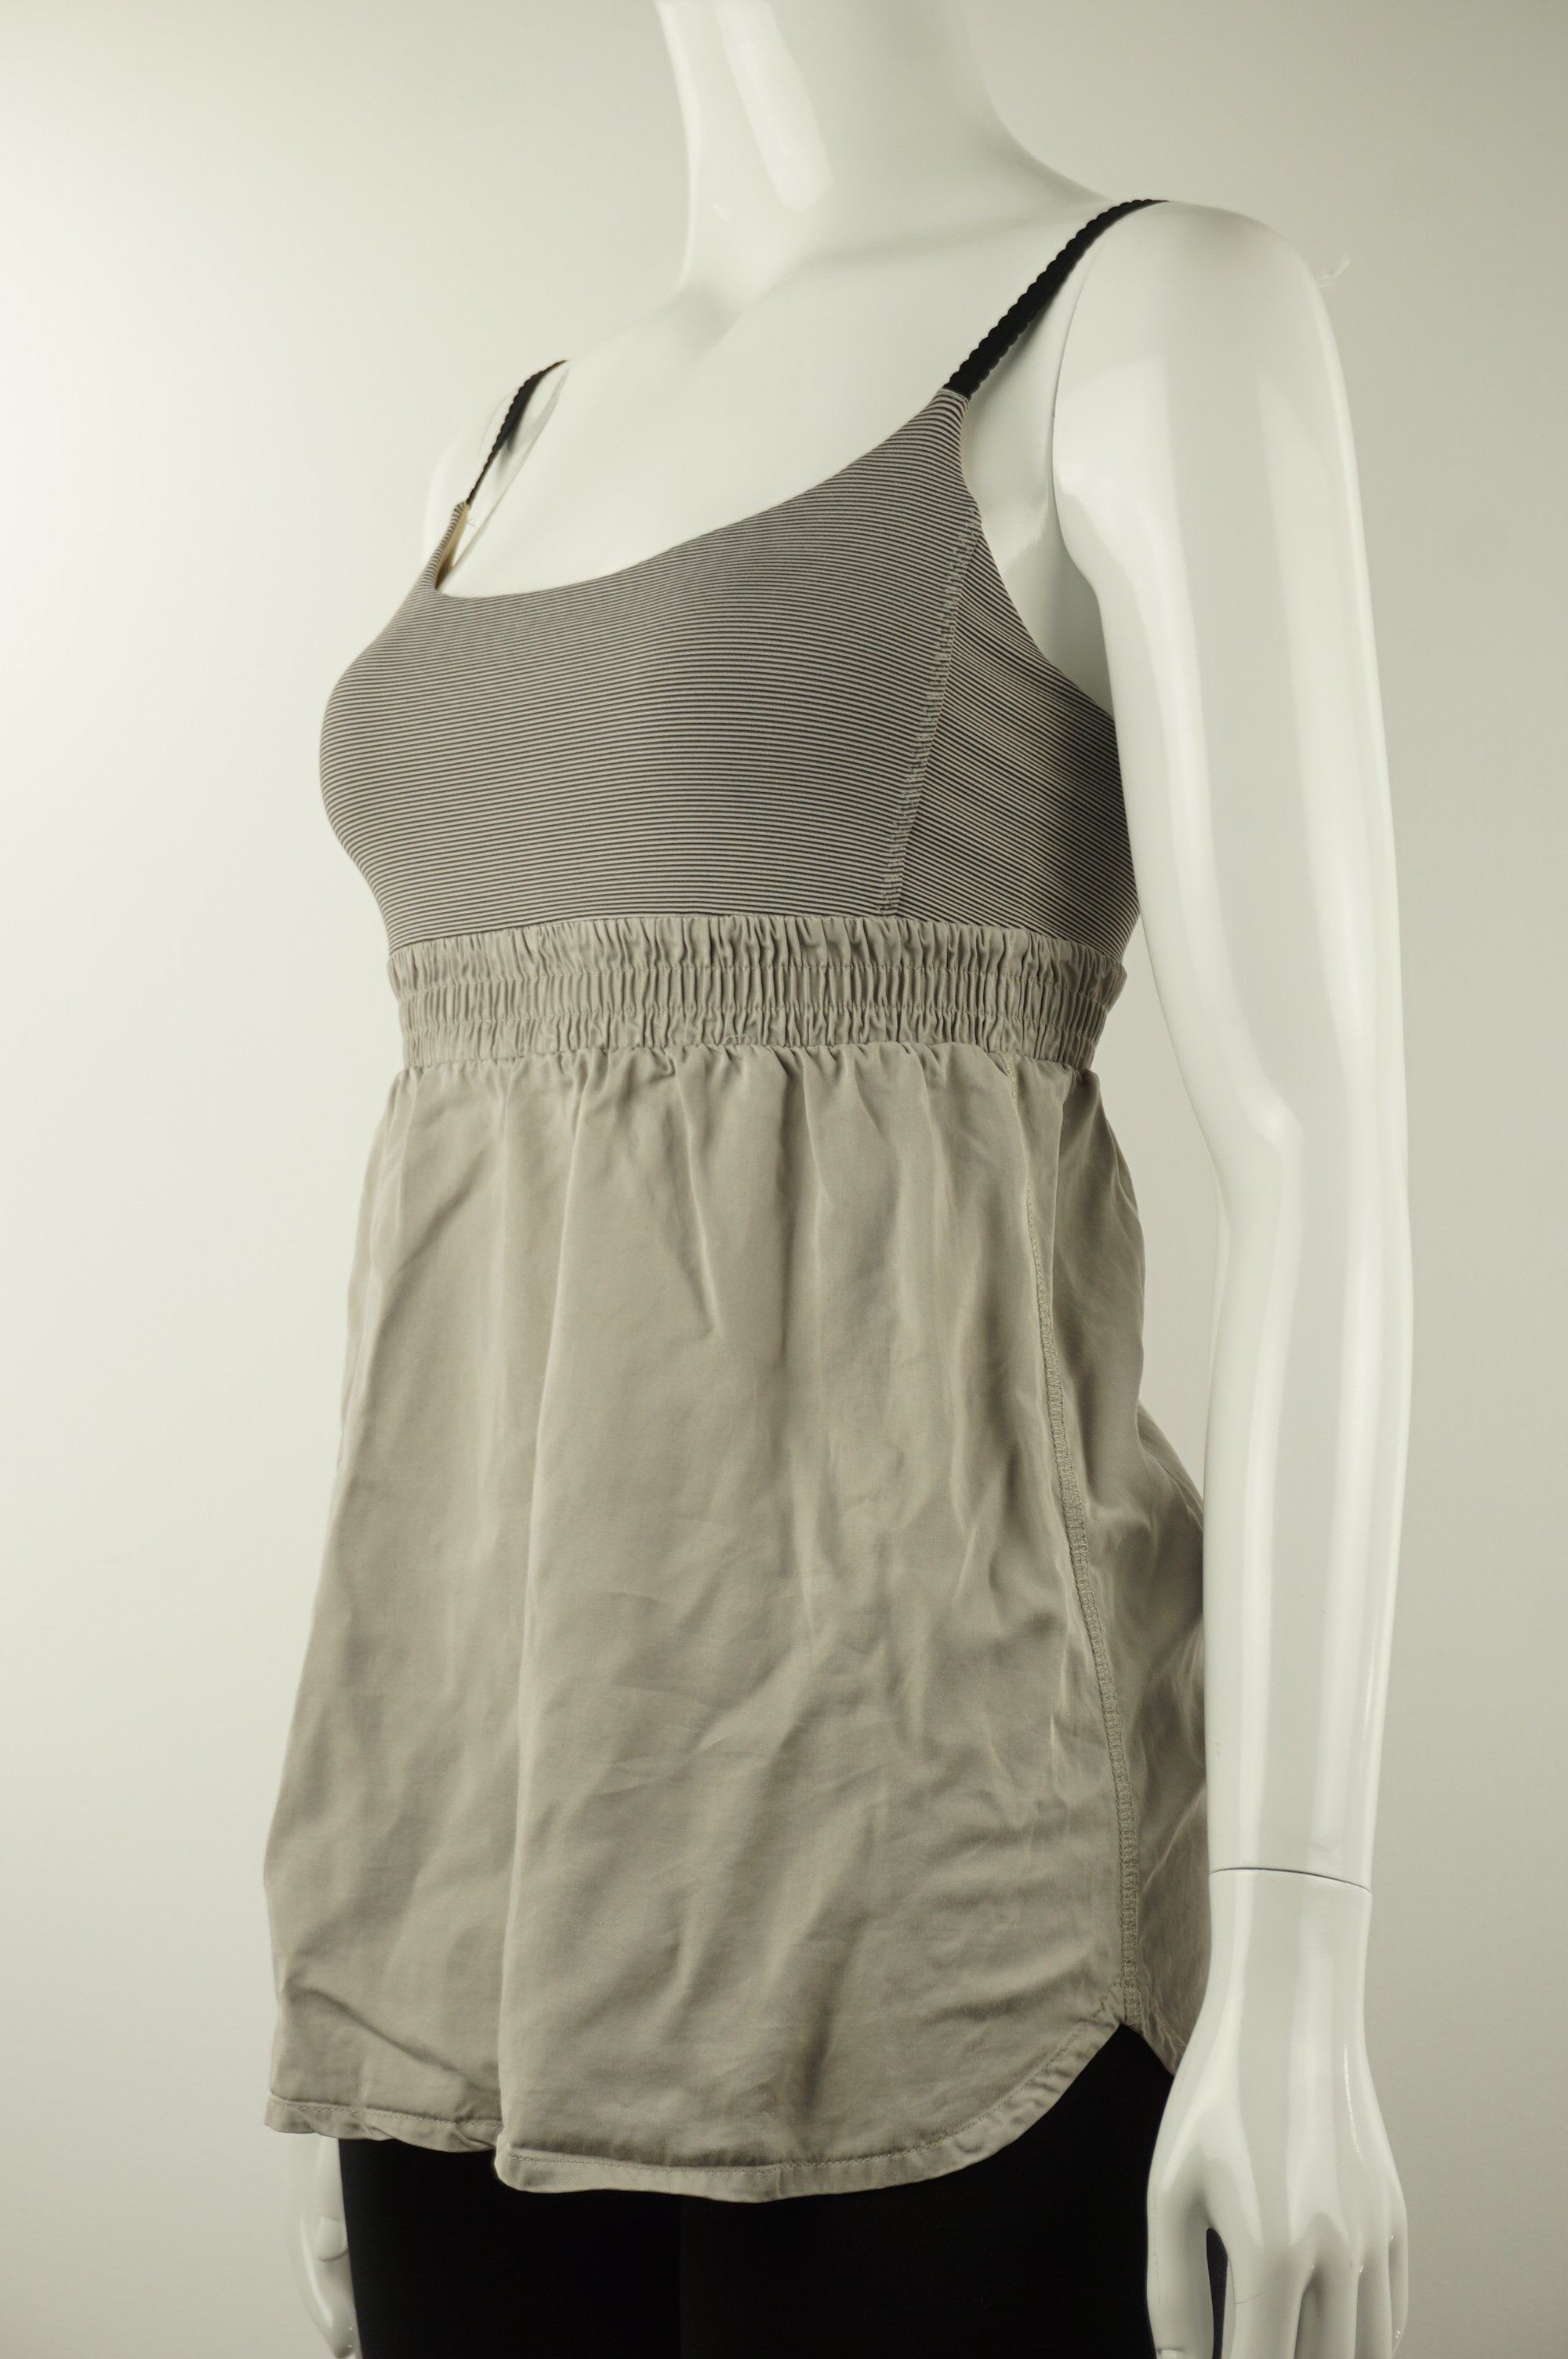 Lululemon Athletic Top, Women or girls top. Lululemon size 6. https://info.lululemon.com/help/size-chart, Grey, Yellow, Nylon, Lycra, and Spandex, Yoga, yoga pants, women's athletic wear, women's work out clothes, women's comfortable pants, fitness, fit